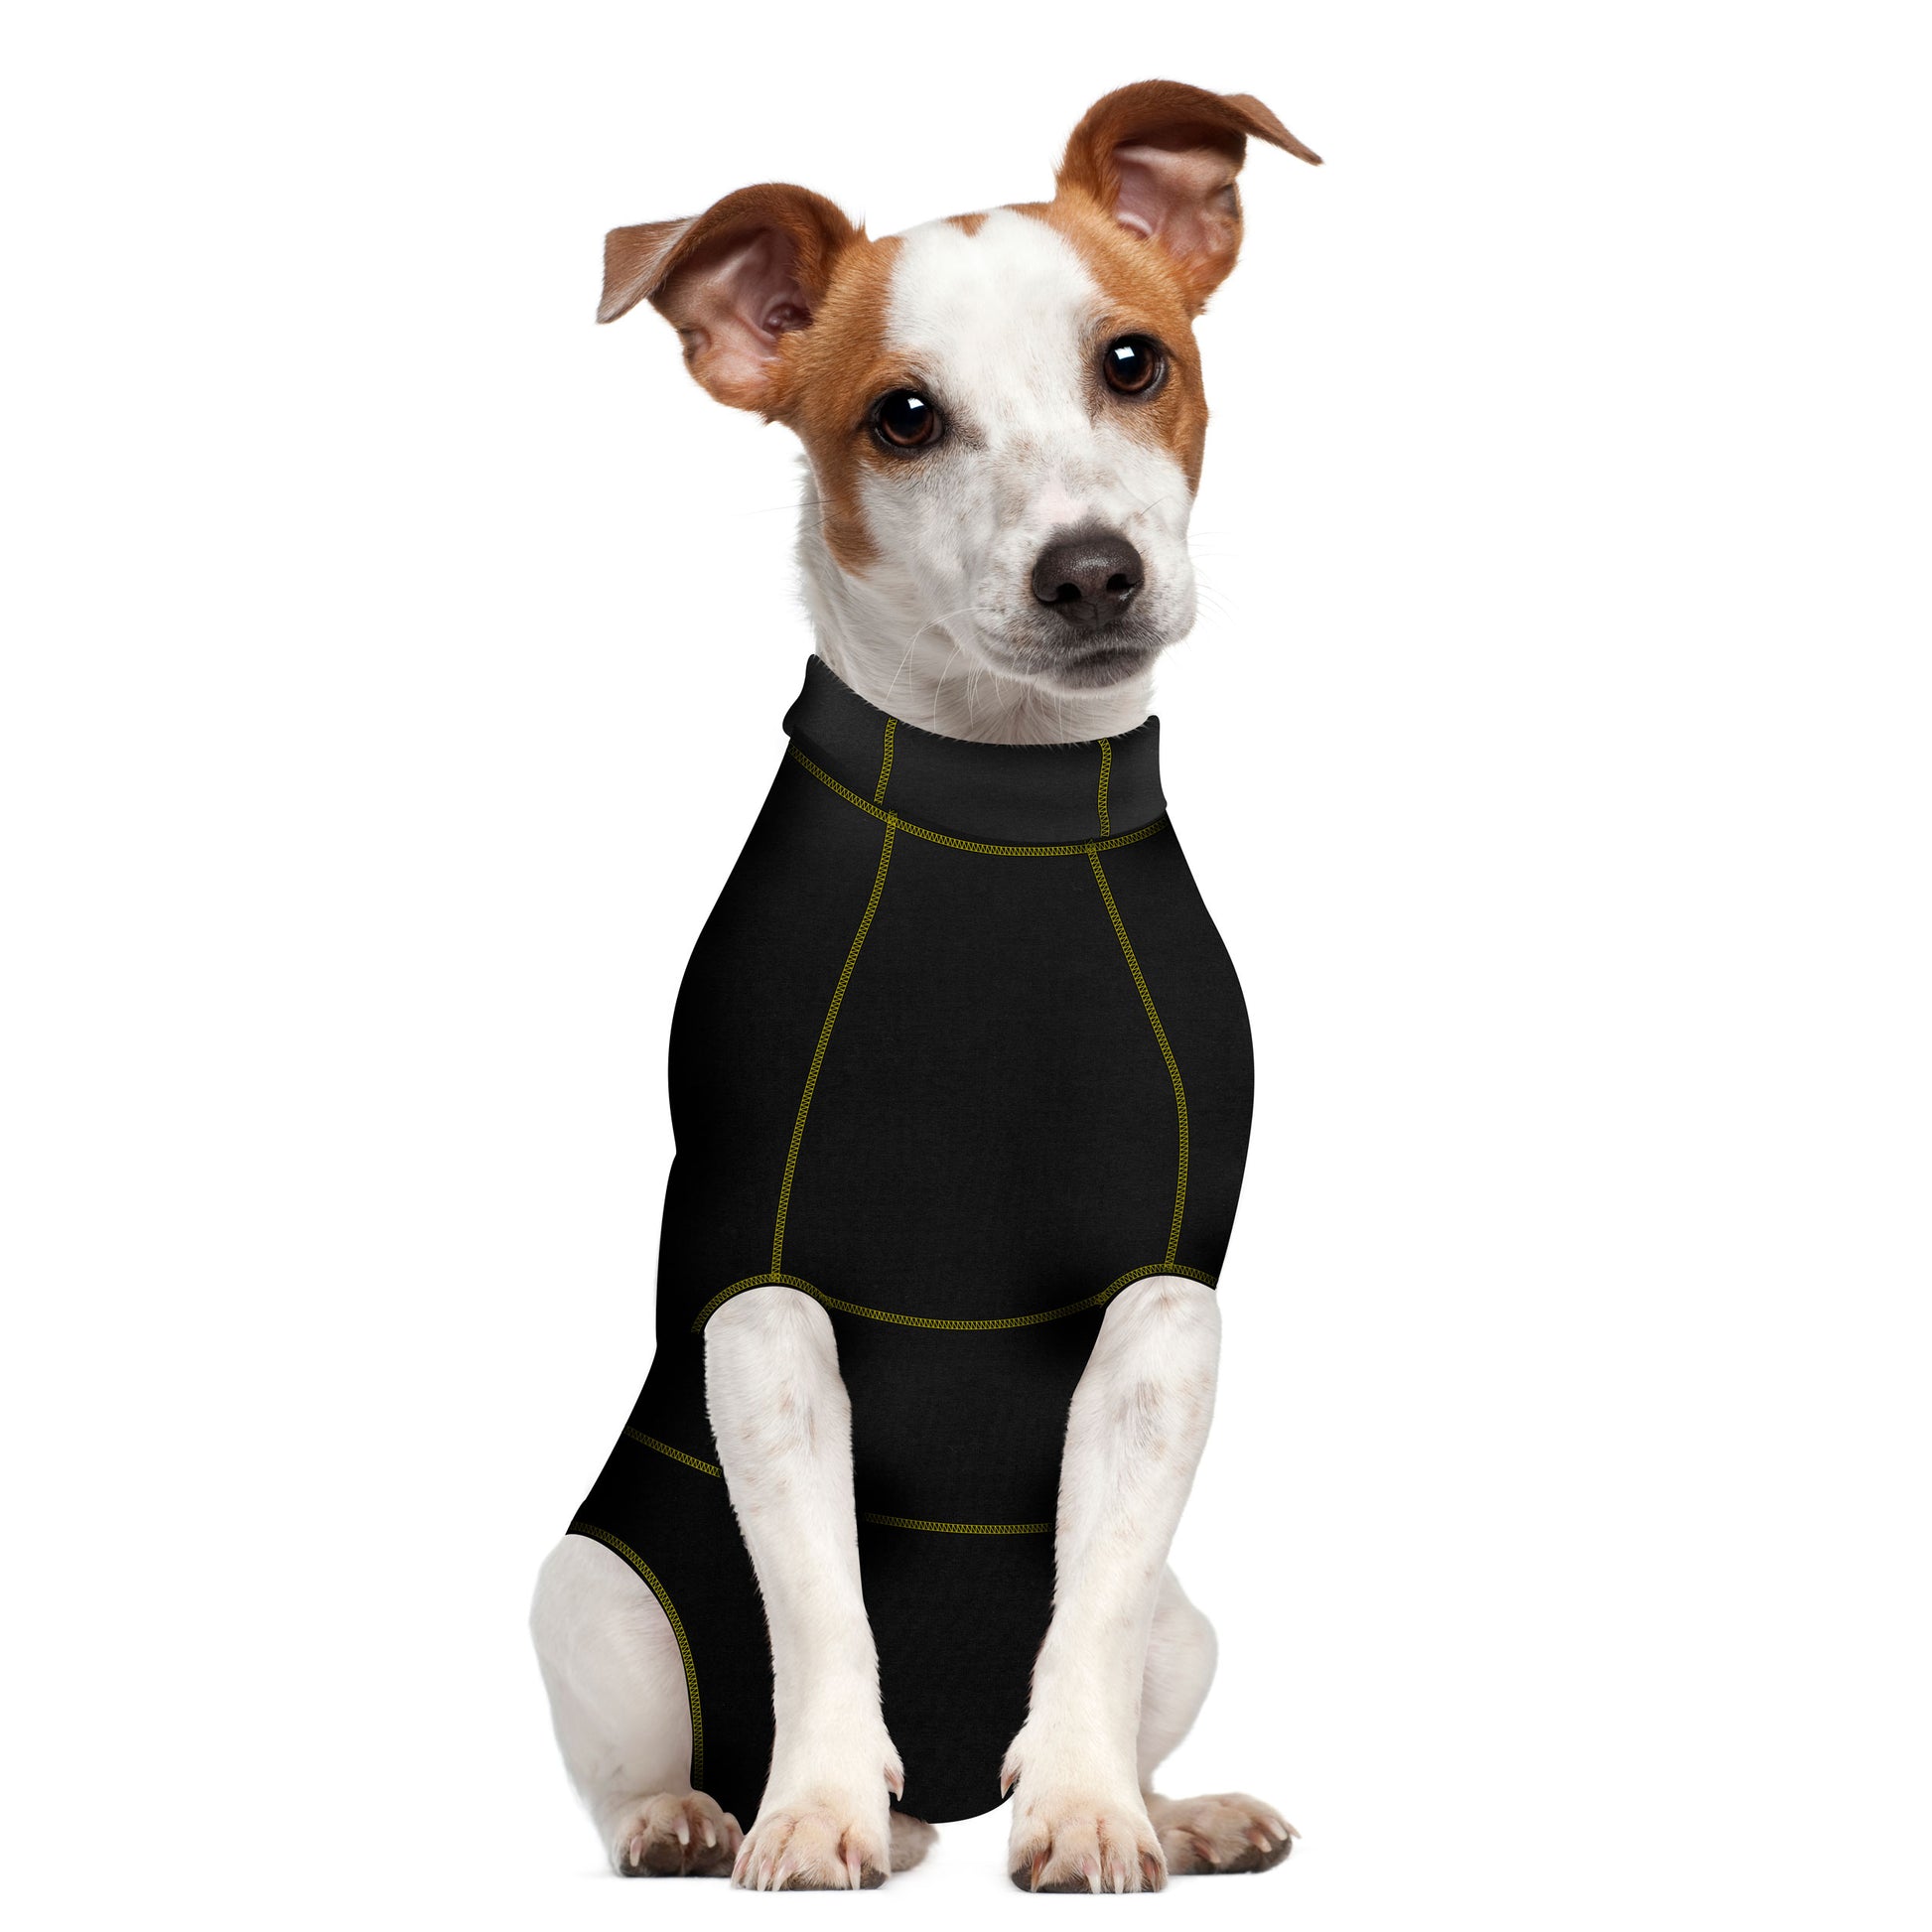 A dog wearing a black MediPaw: Protective/Surgical Dog Suit by Your Whole Dog sitting on a white background in Australia.